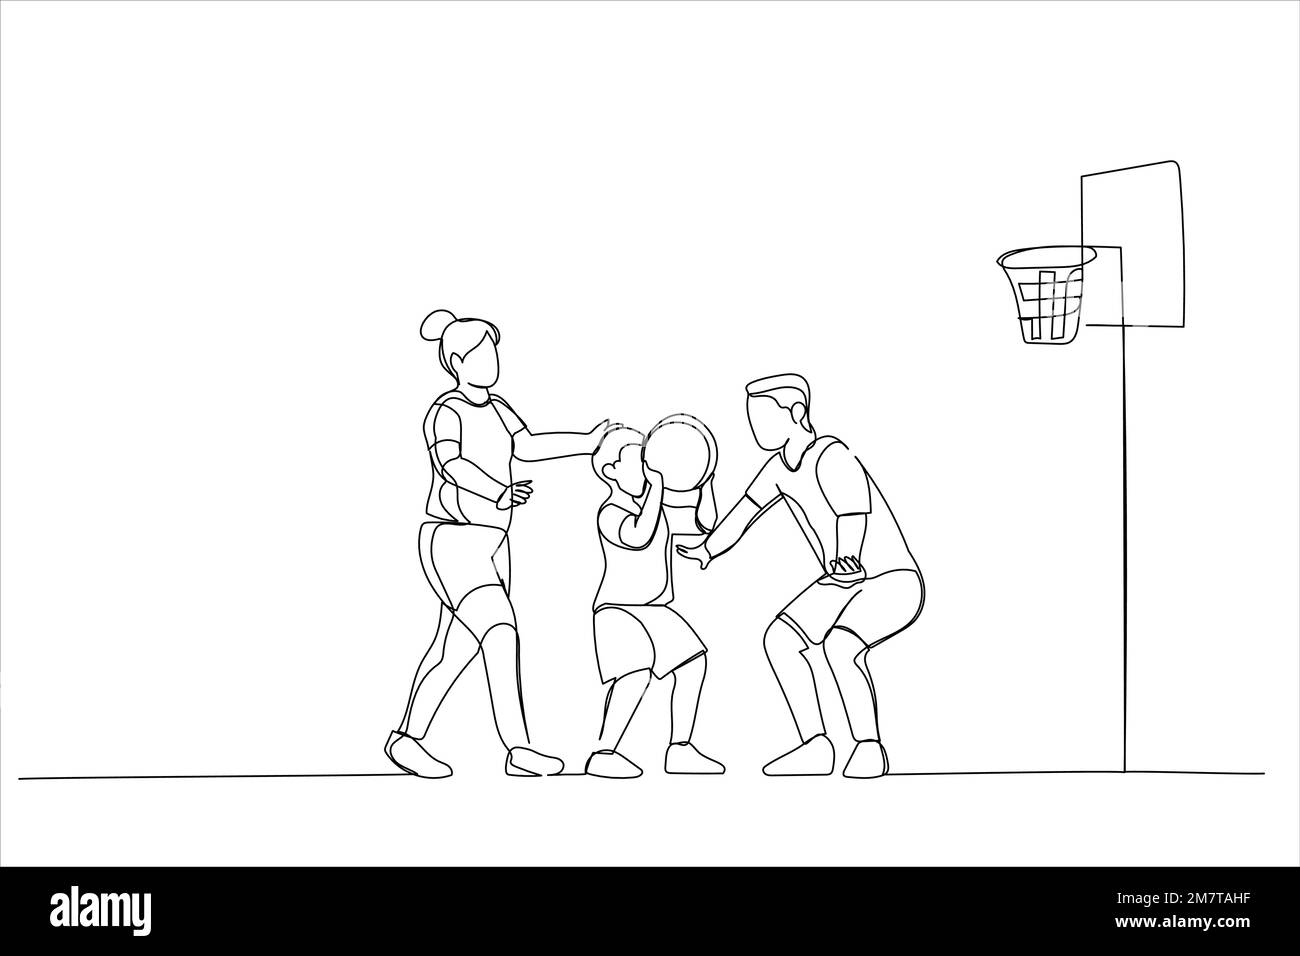 Drawing of family playing basketball together. Single line art style Stock Vector